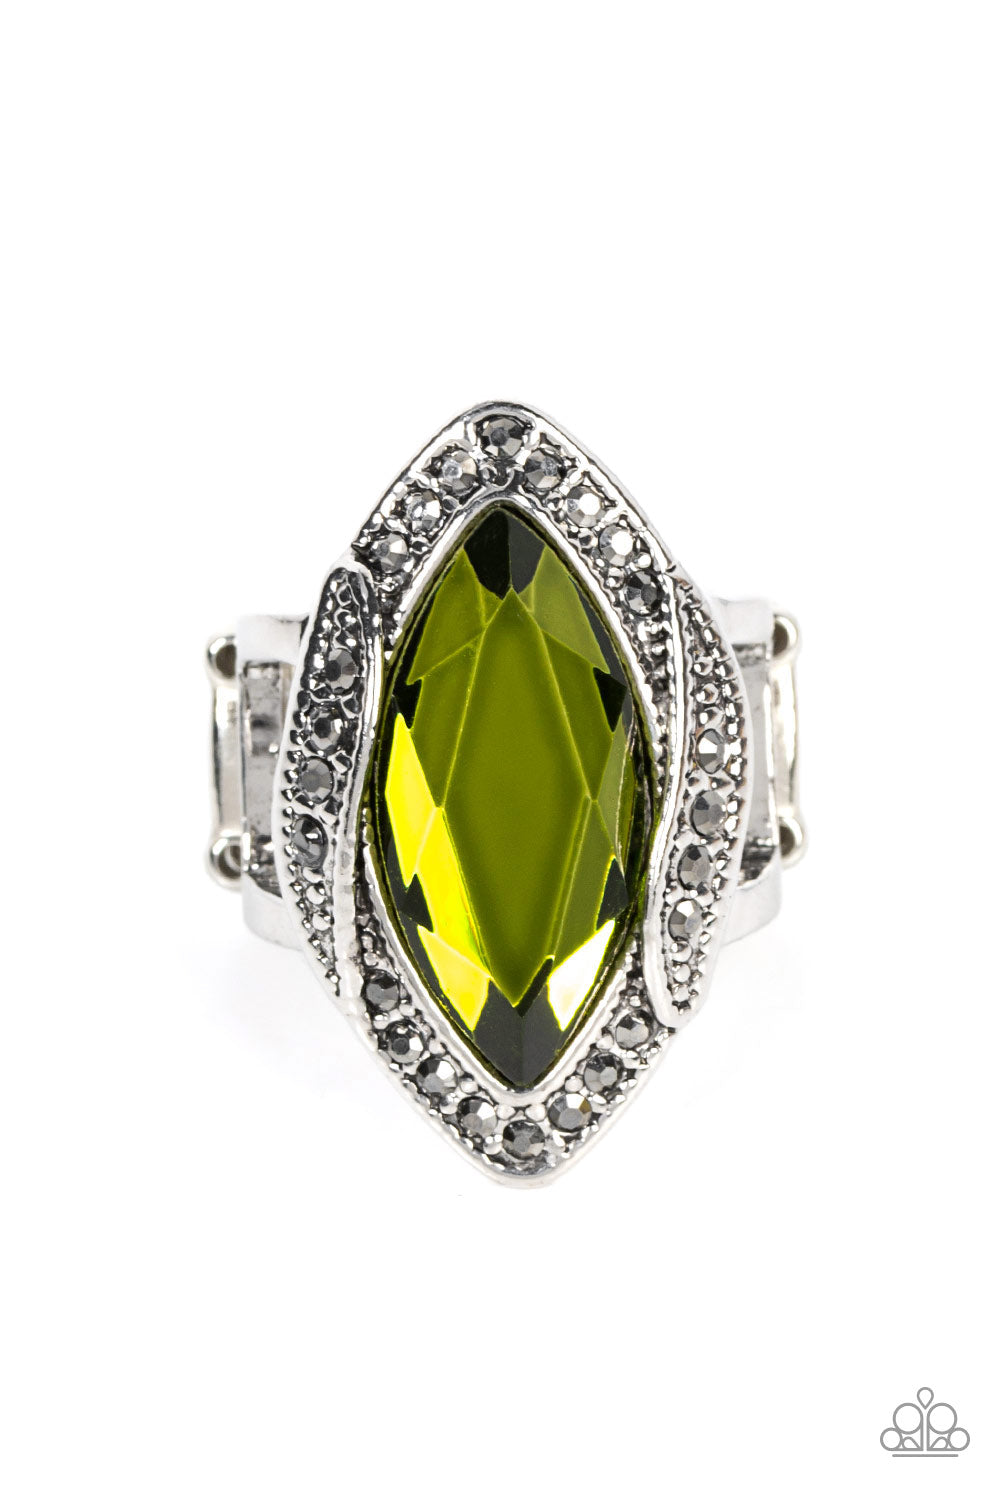 Dotted in dainty hematite rhinestones, folds of silver gather around an oversized marquise cut green gem for a gritty display of glitter atop the finger. Features a stretchy band for a flexible fit.  Sold as one individual ring.